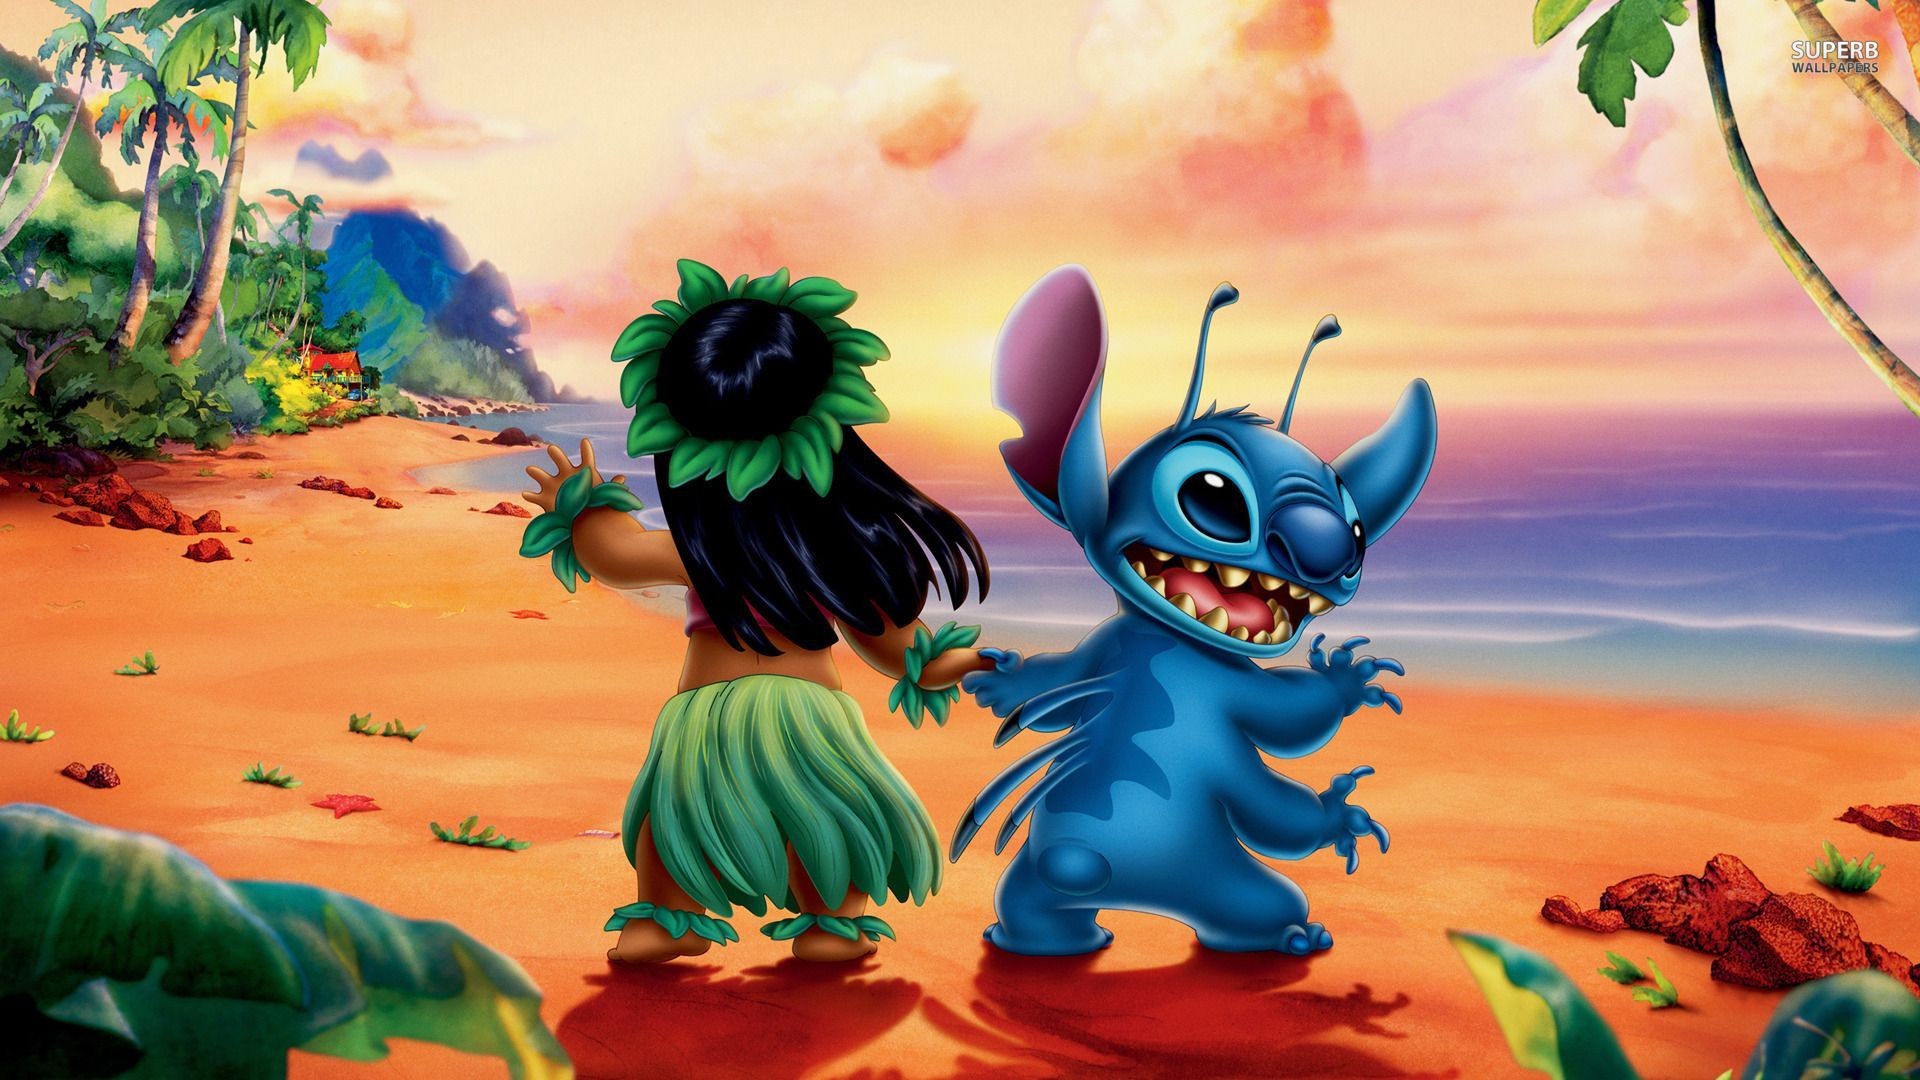 1920x1080 Recommended: Lilo And Stitch Pictures 07/01/2017, Rosalva Joynt